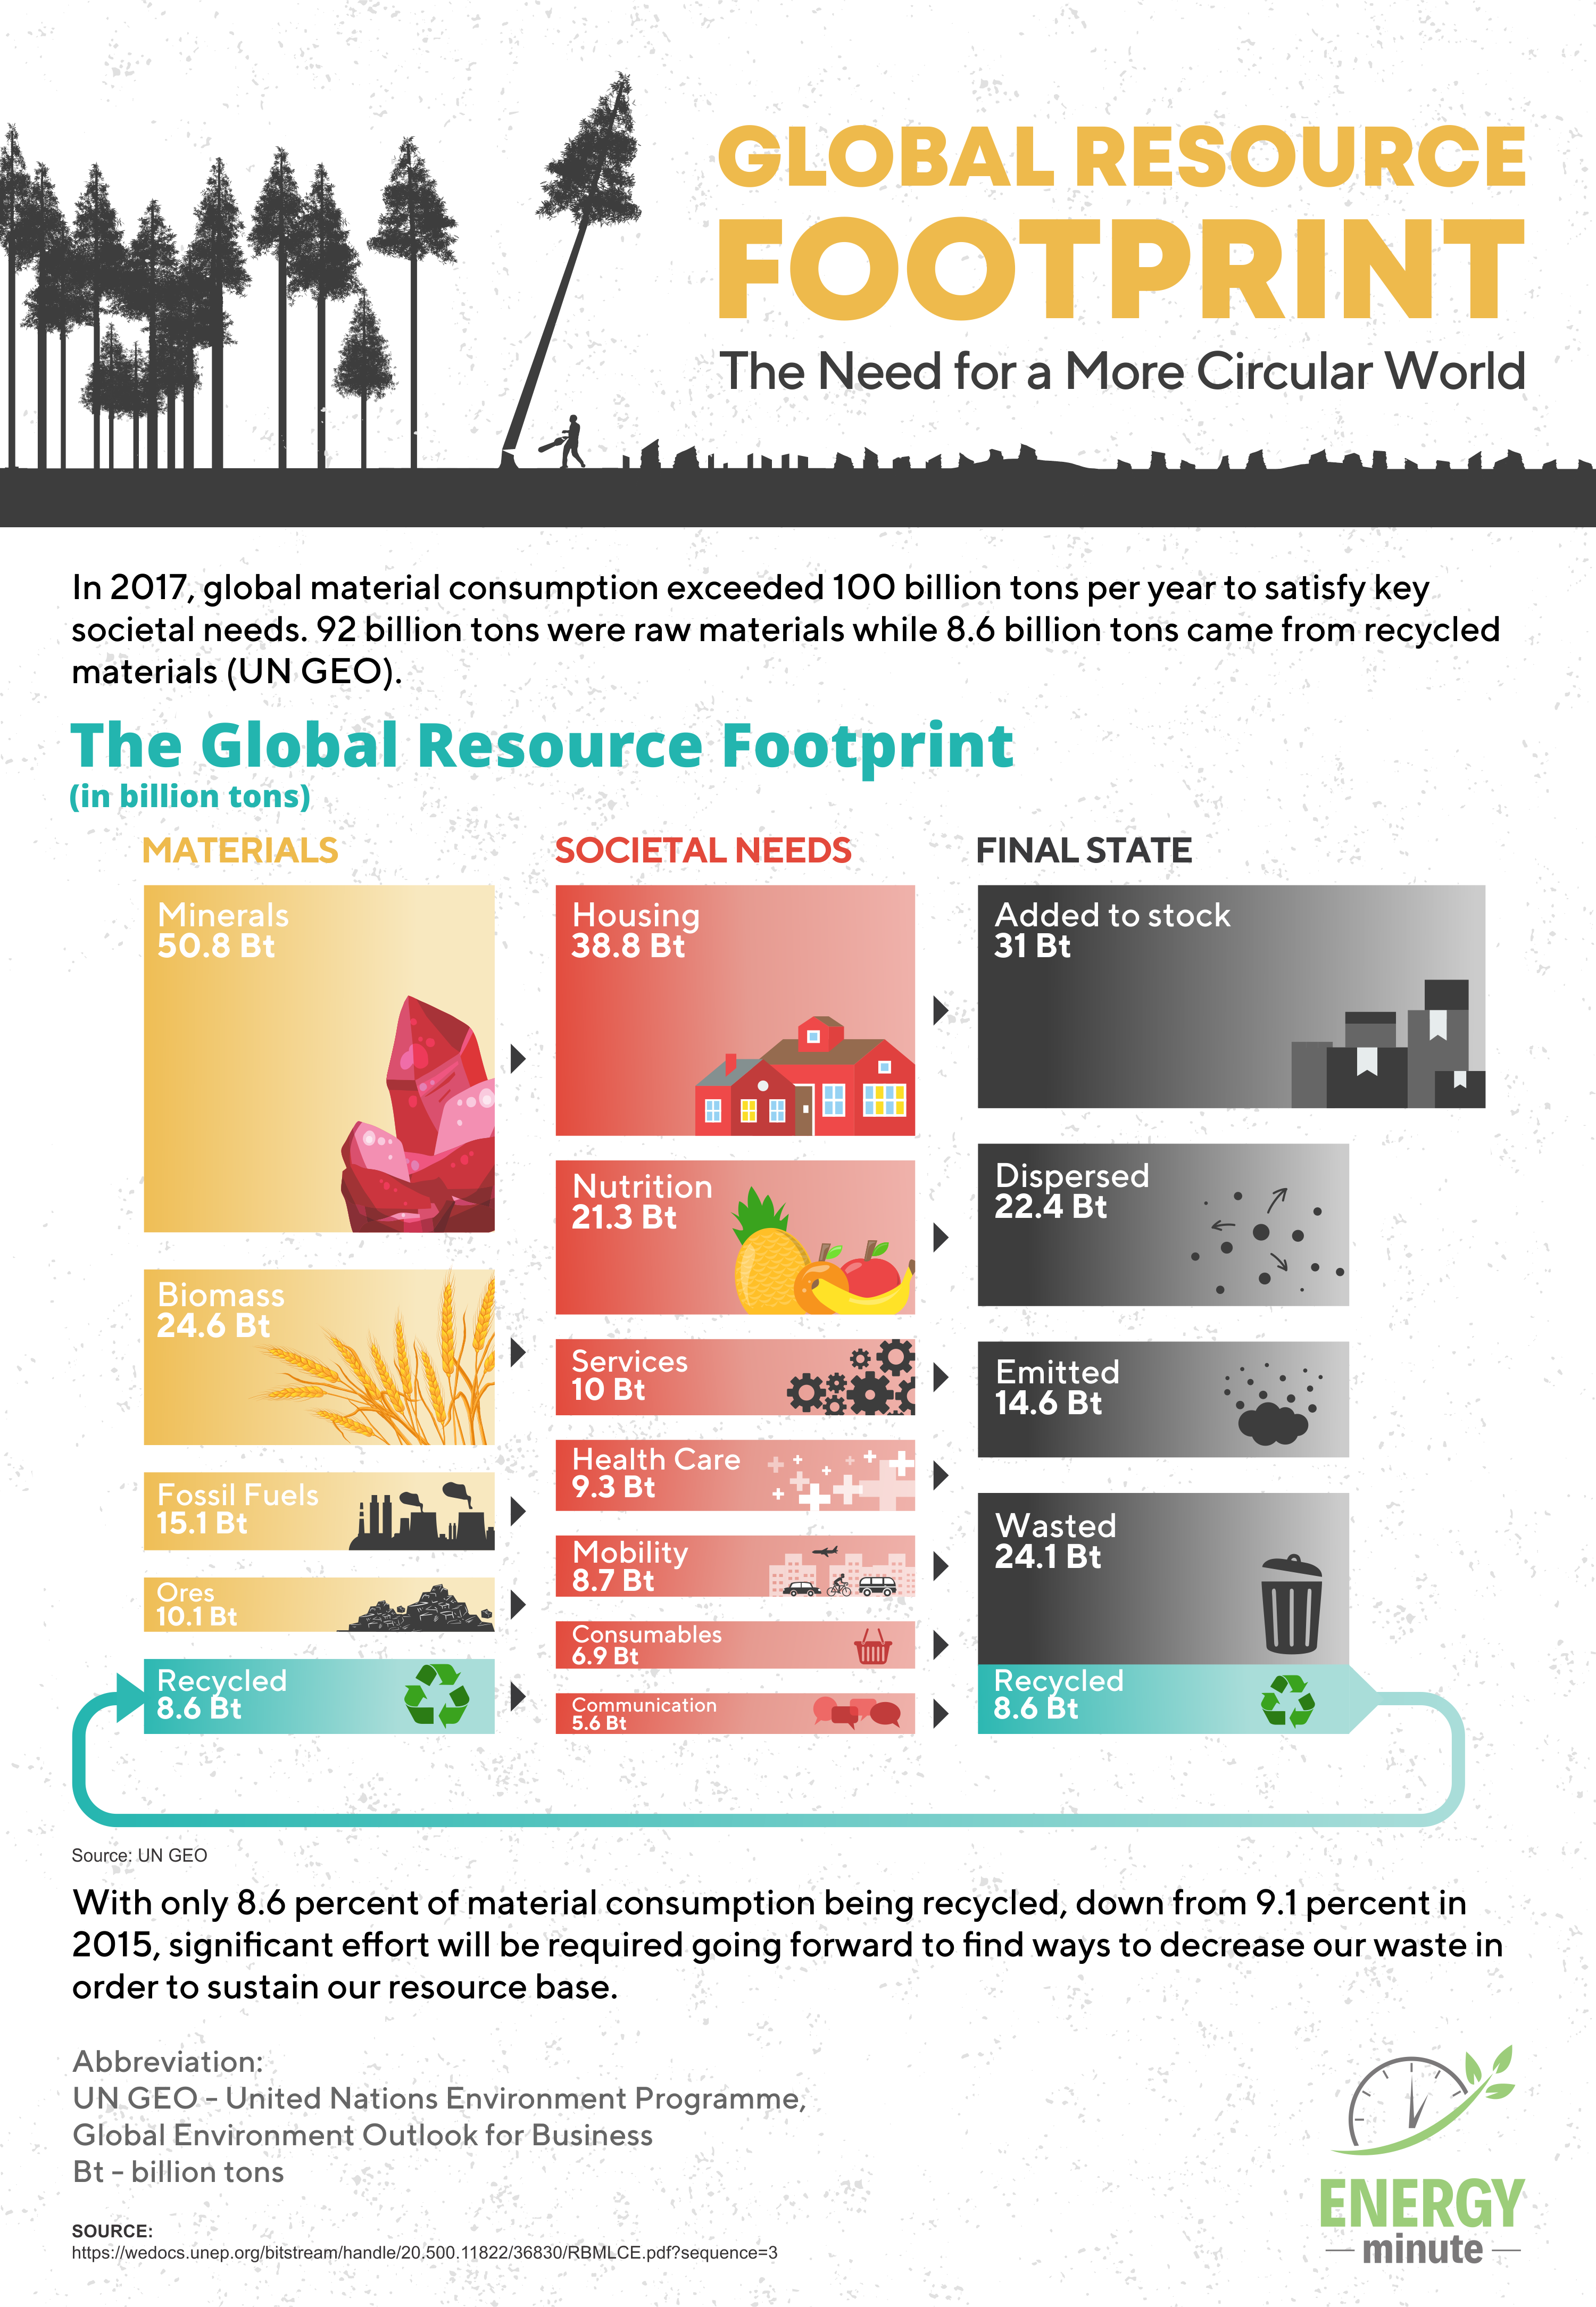 Visualized: The Material Global Resource Footprint